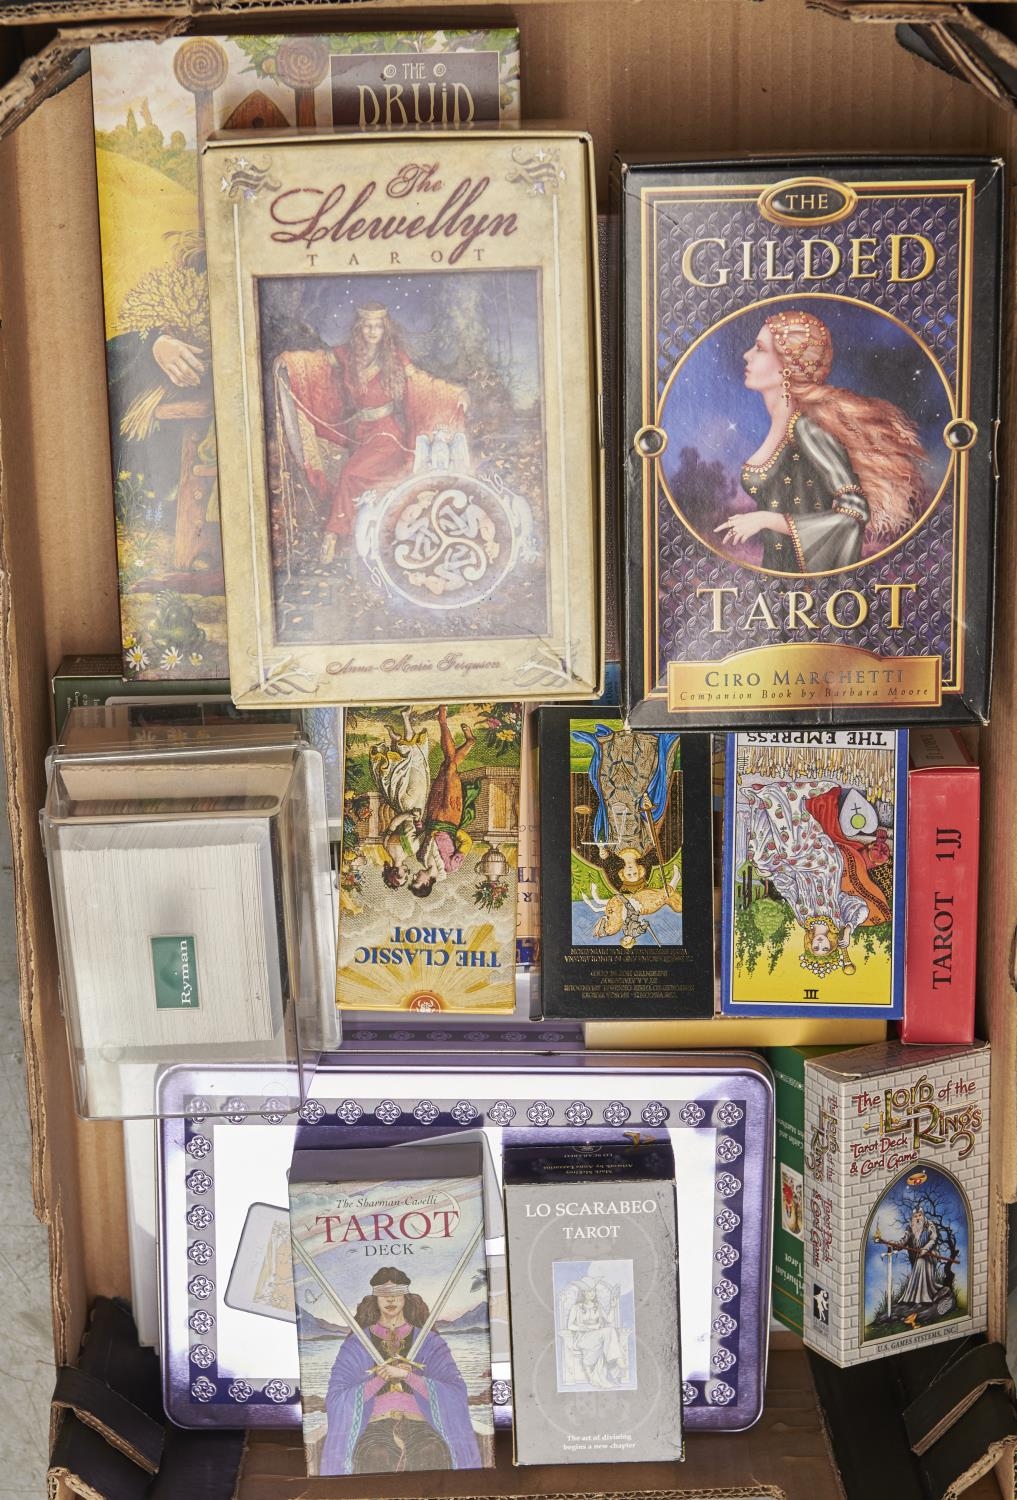 Tarot Cards. A collection of Tarot and other similar decks of cards and games, including Lord of The